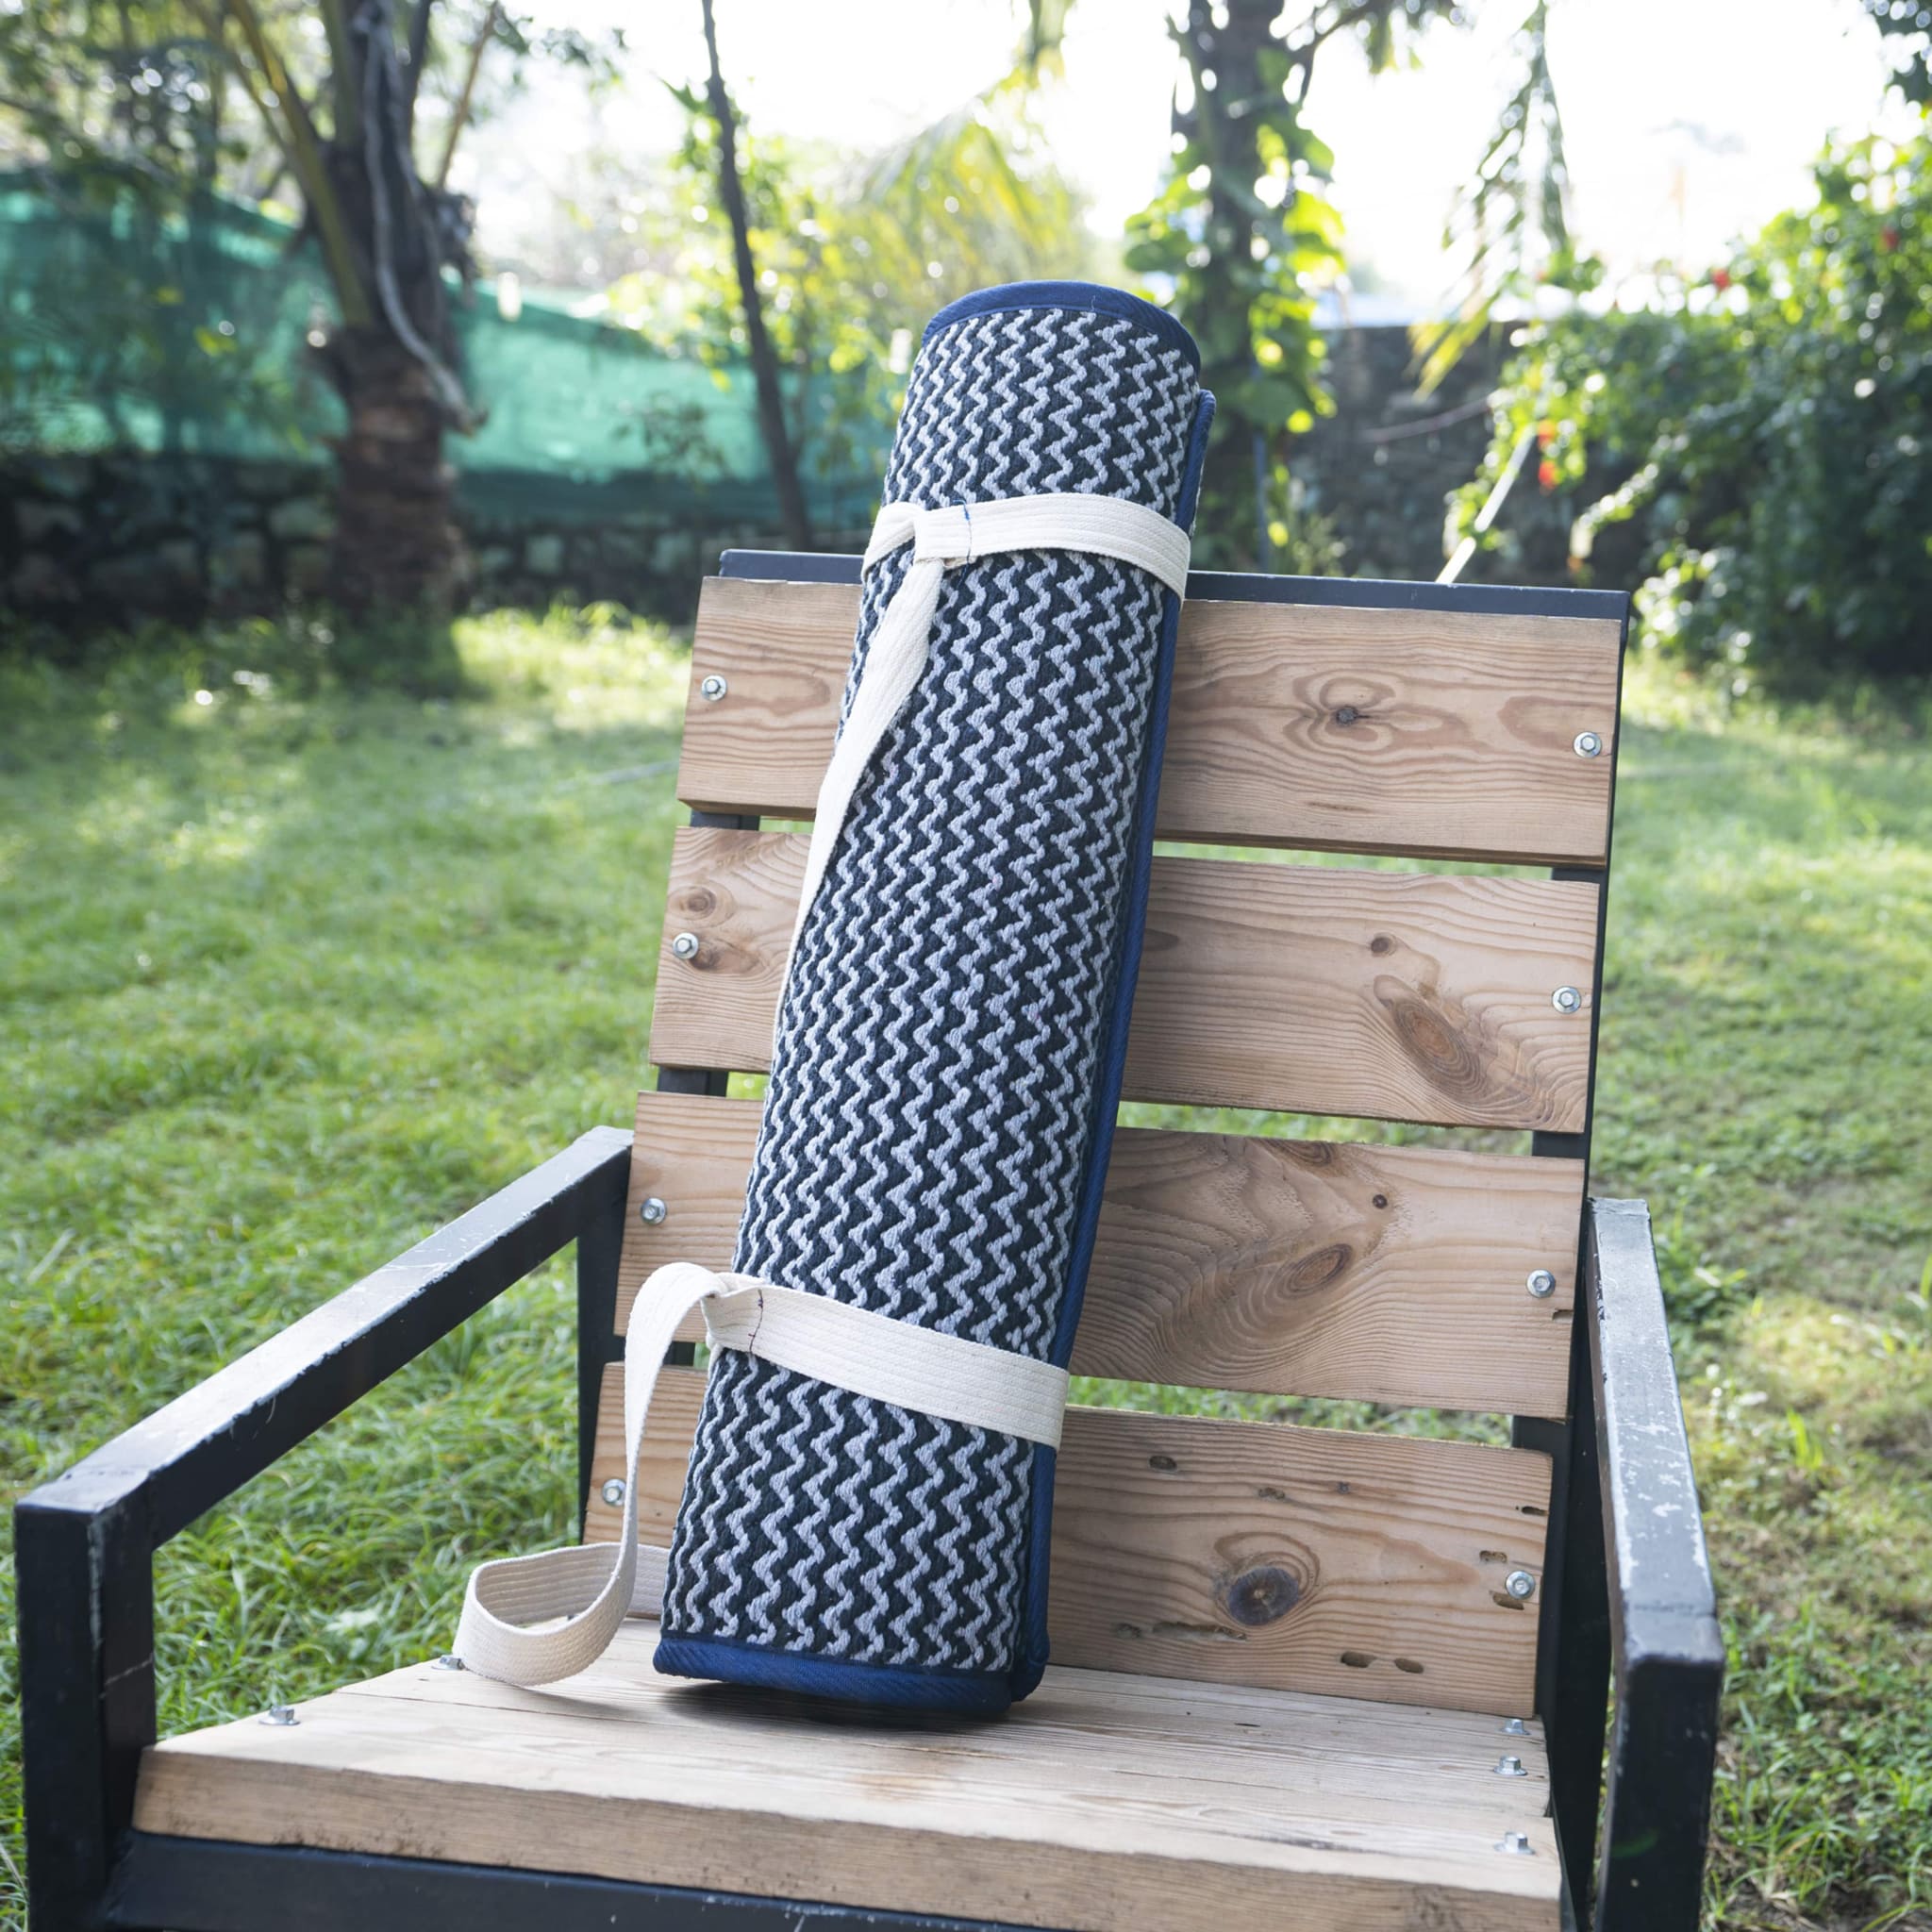 DVAAR COTTON YOGA MAT AAKASHA WASHABLE NATURAL MAT WITH THICK CLOTH BACKING 8MM FOR KNEE SUPPORT AND CUSHIONING HOME YOGA WORKOUTS SUSTAINABLE MATS.